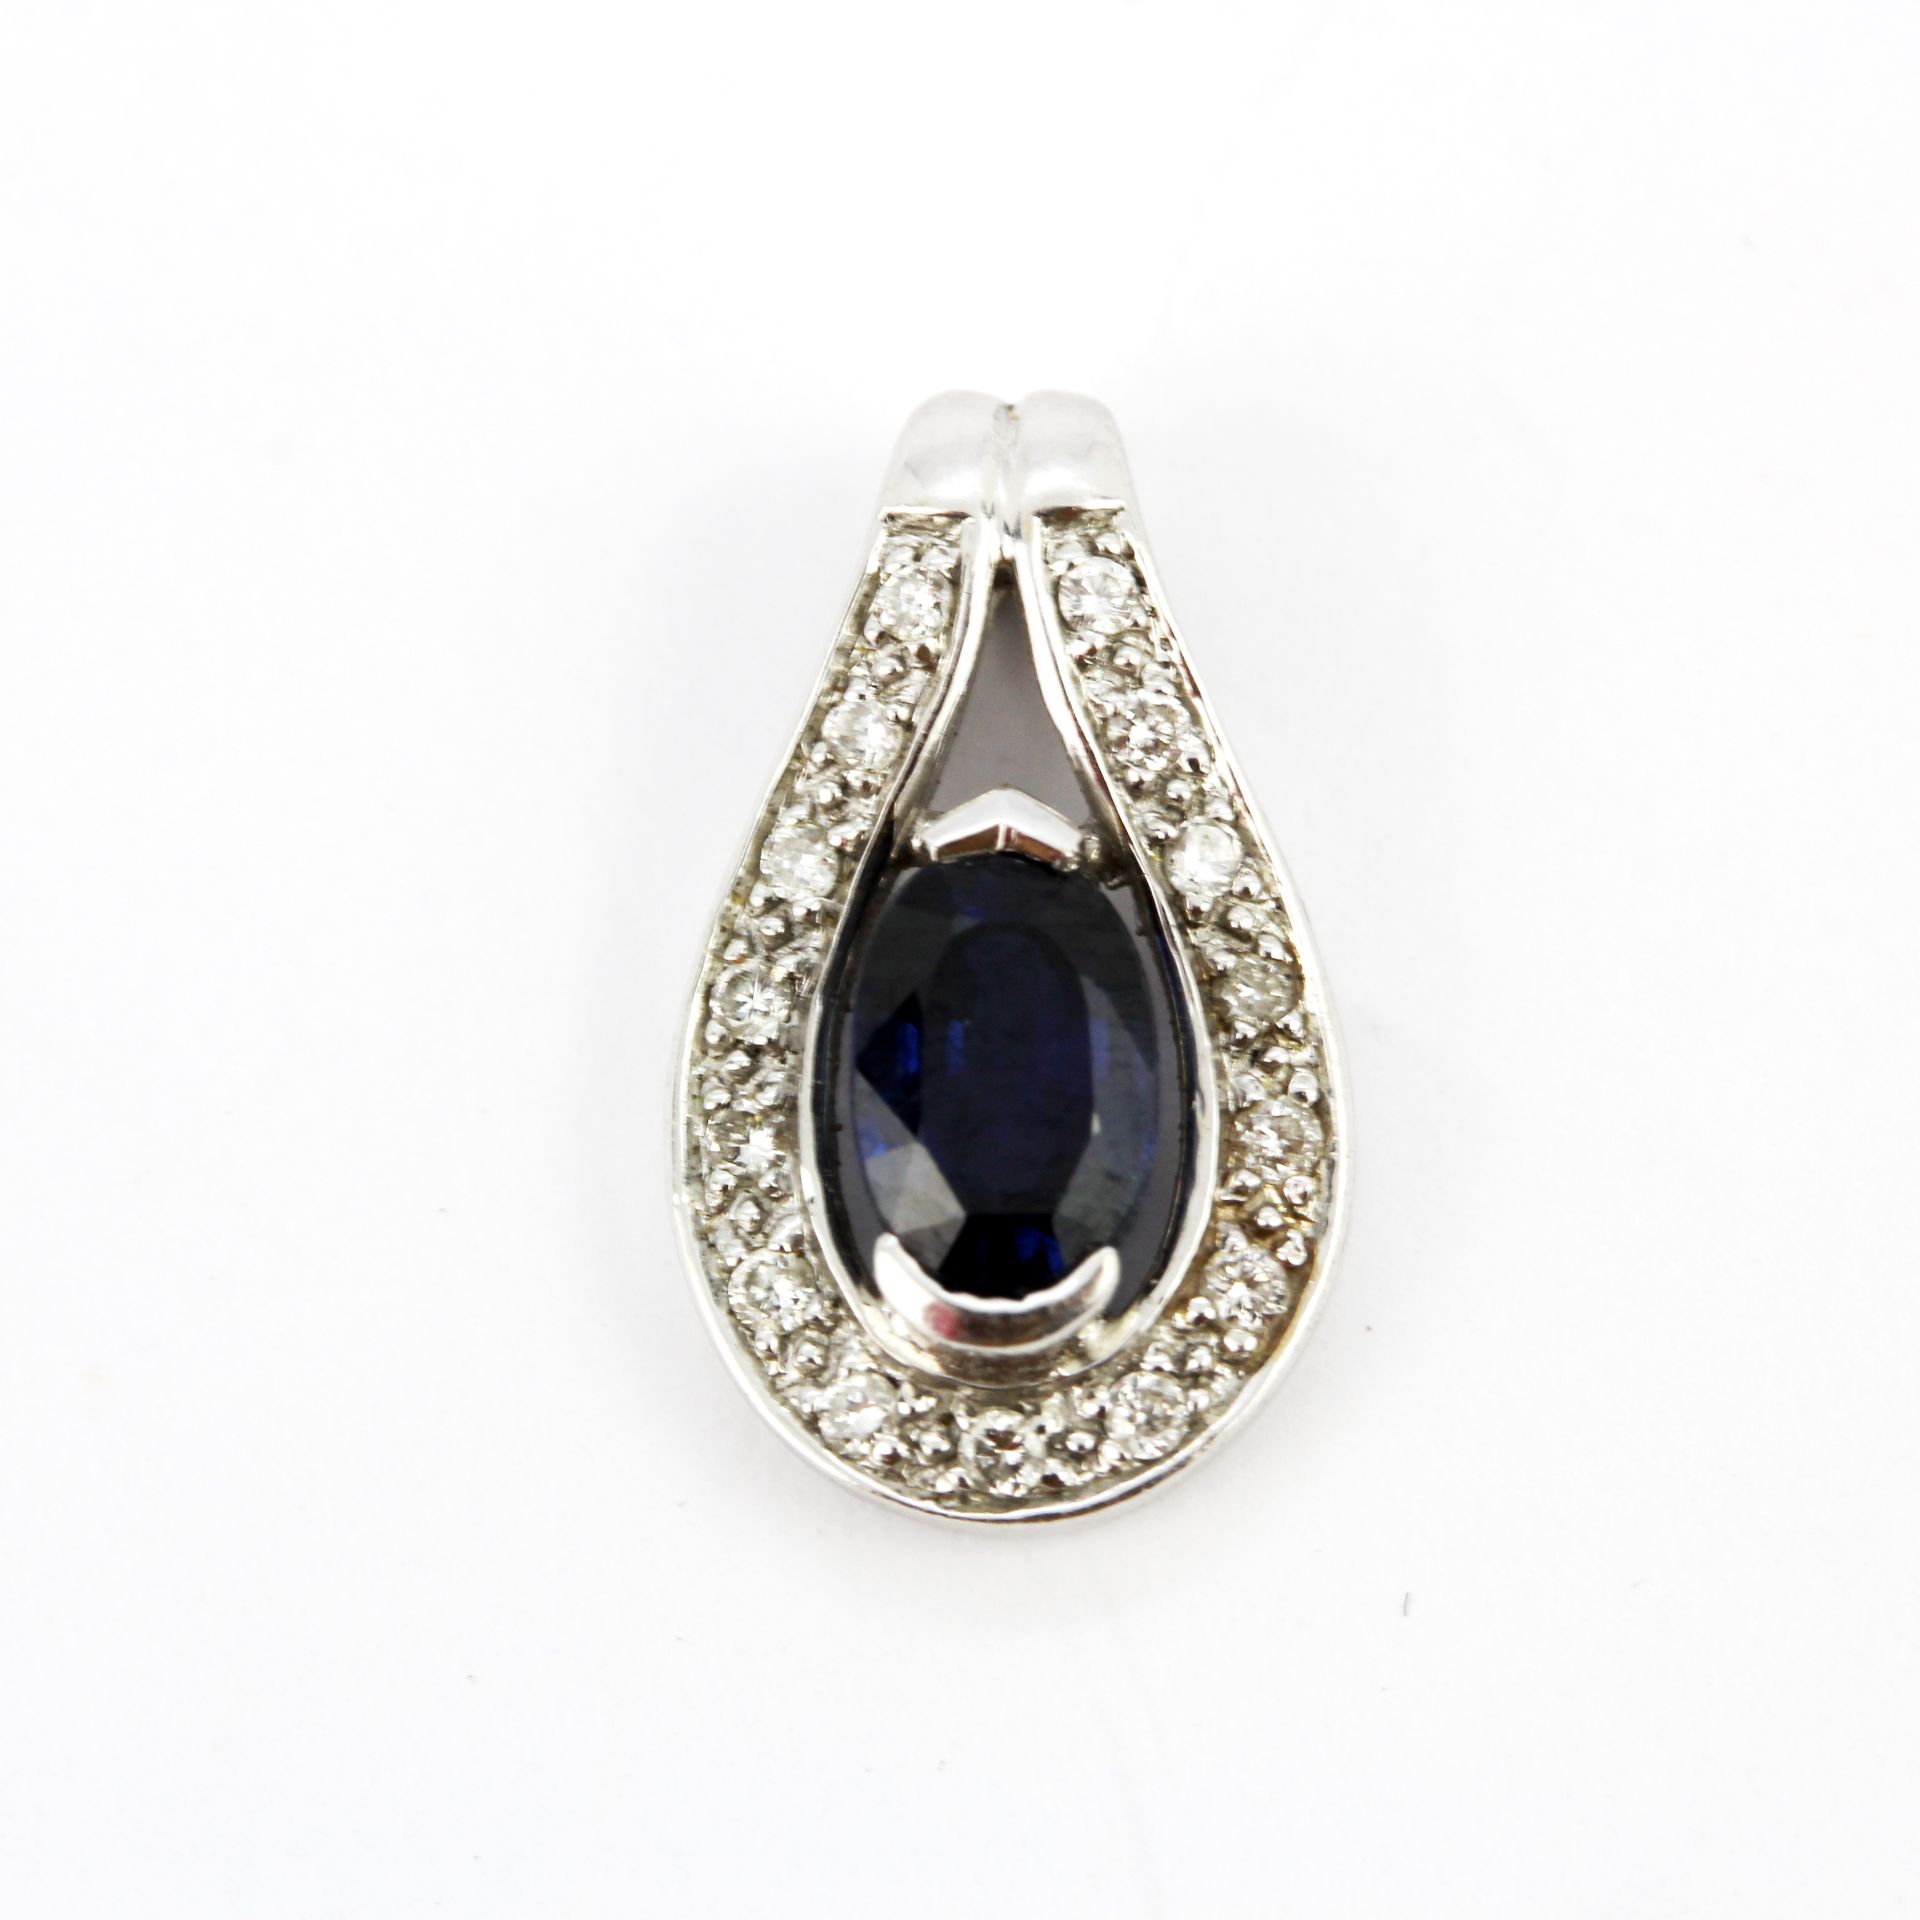 An 18ct white gold pendant set with an oval cut sapphire surrounded by diamonds, L. 1.5cm.